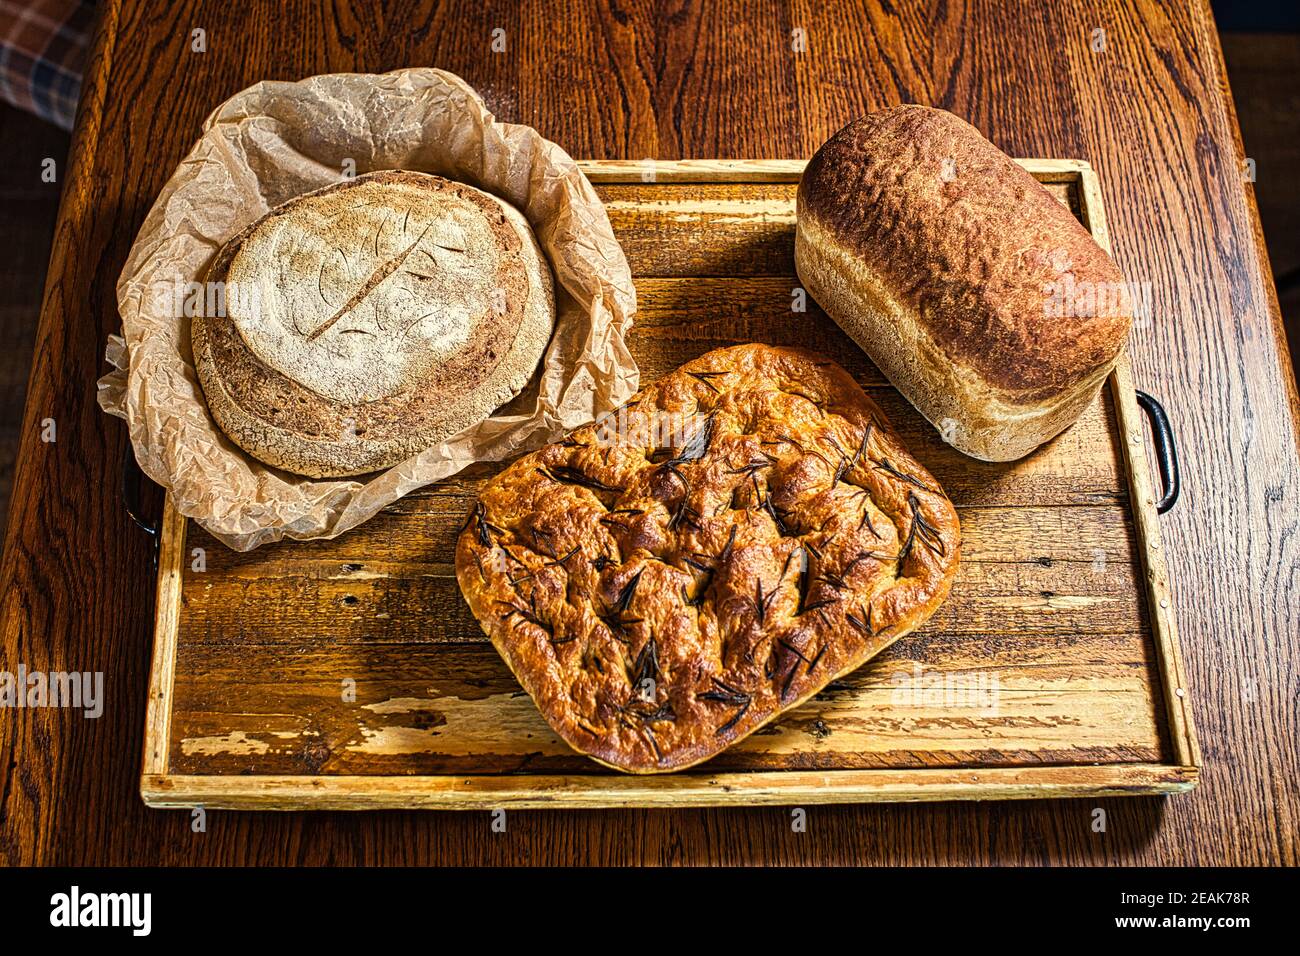 GREAT BRITAIN / England / freshly baked loaf of rye and wheat homemade sourdough bread / making artisan bread . Stock Photo